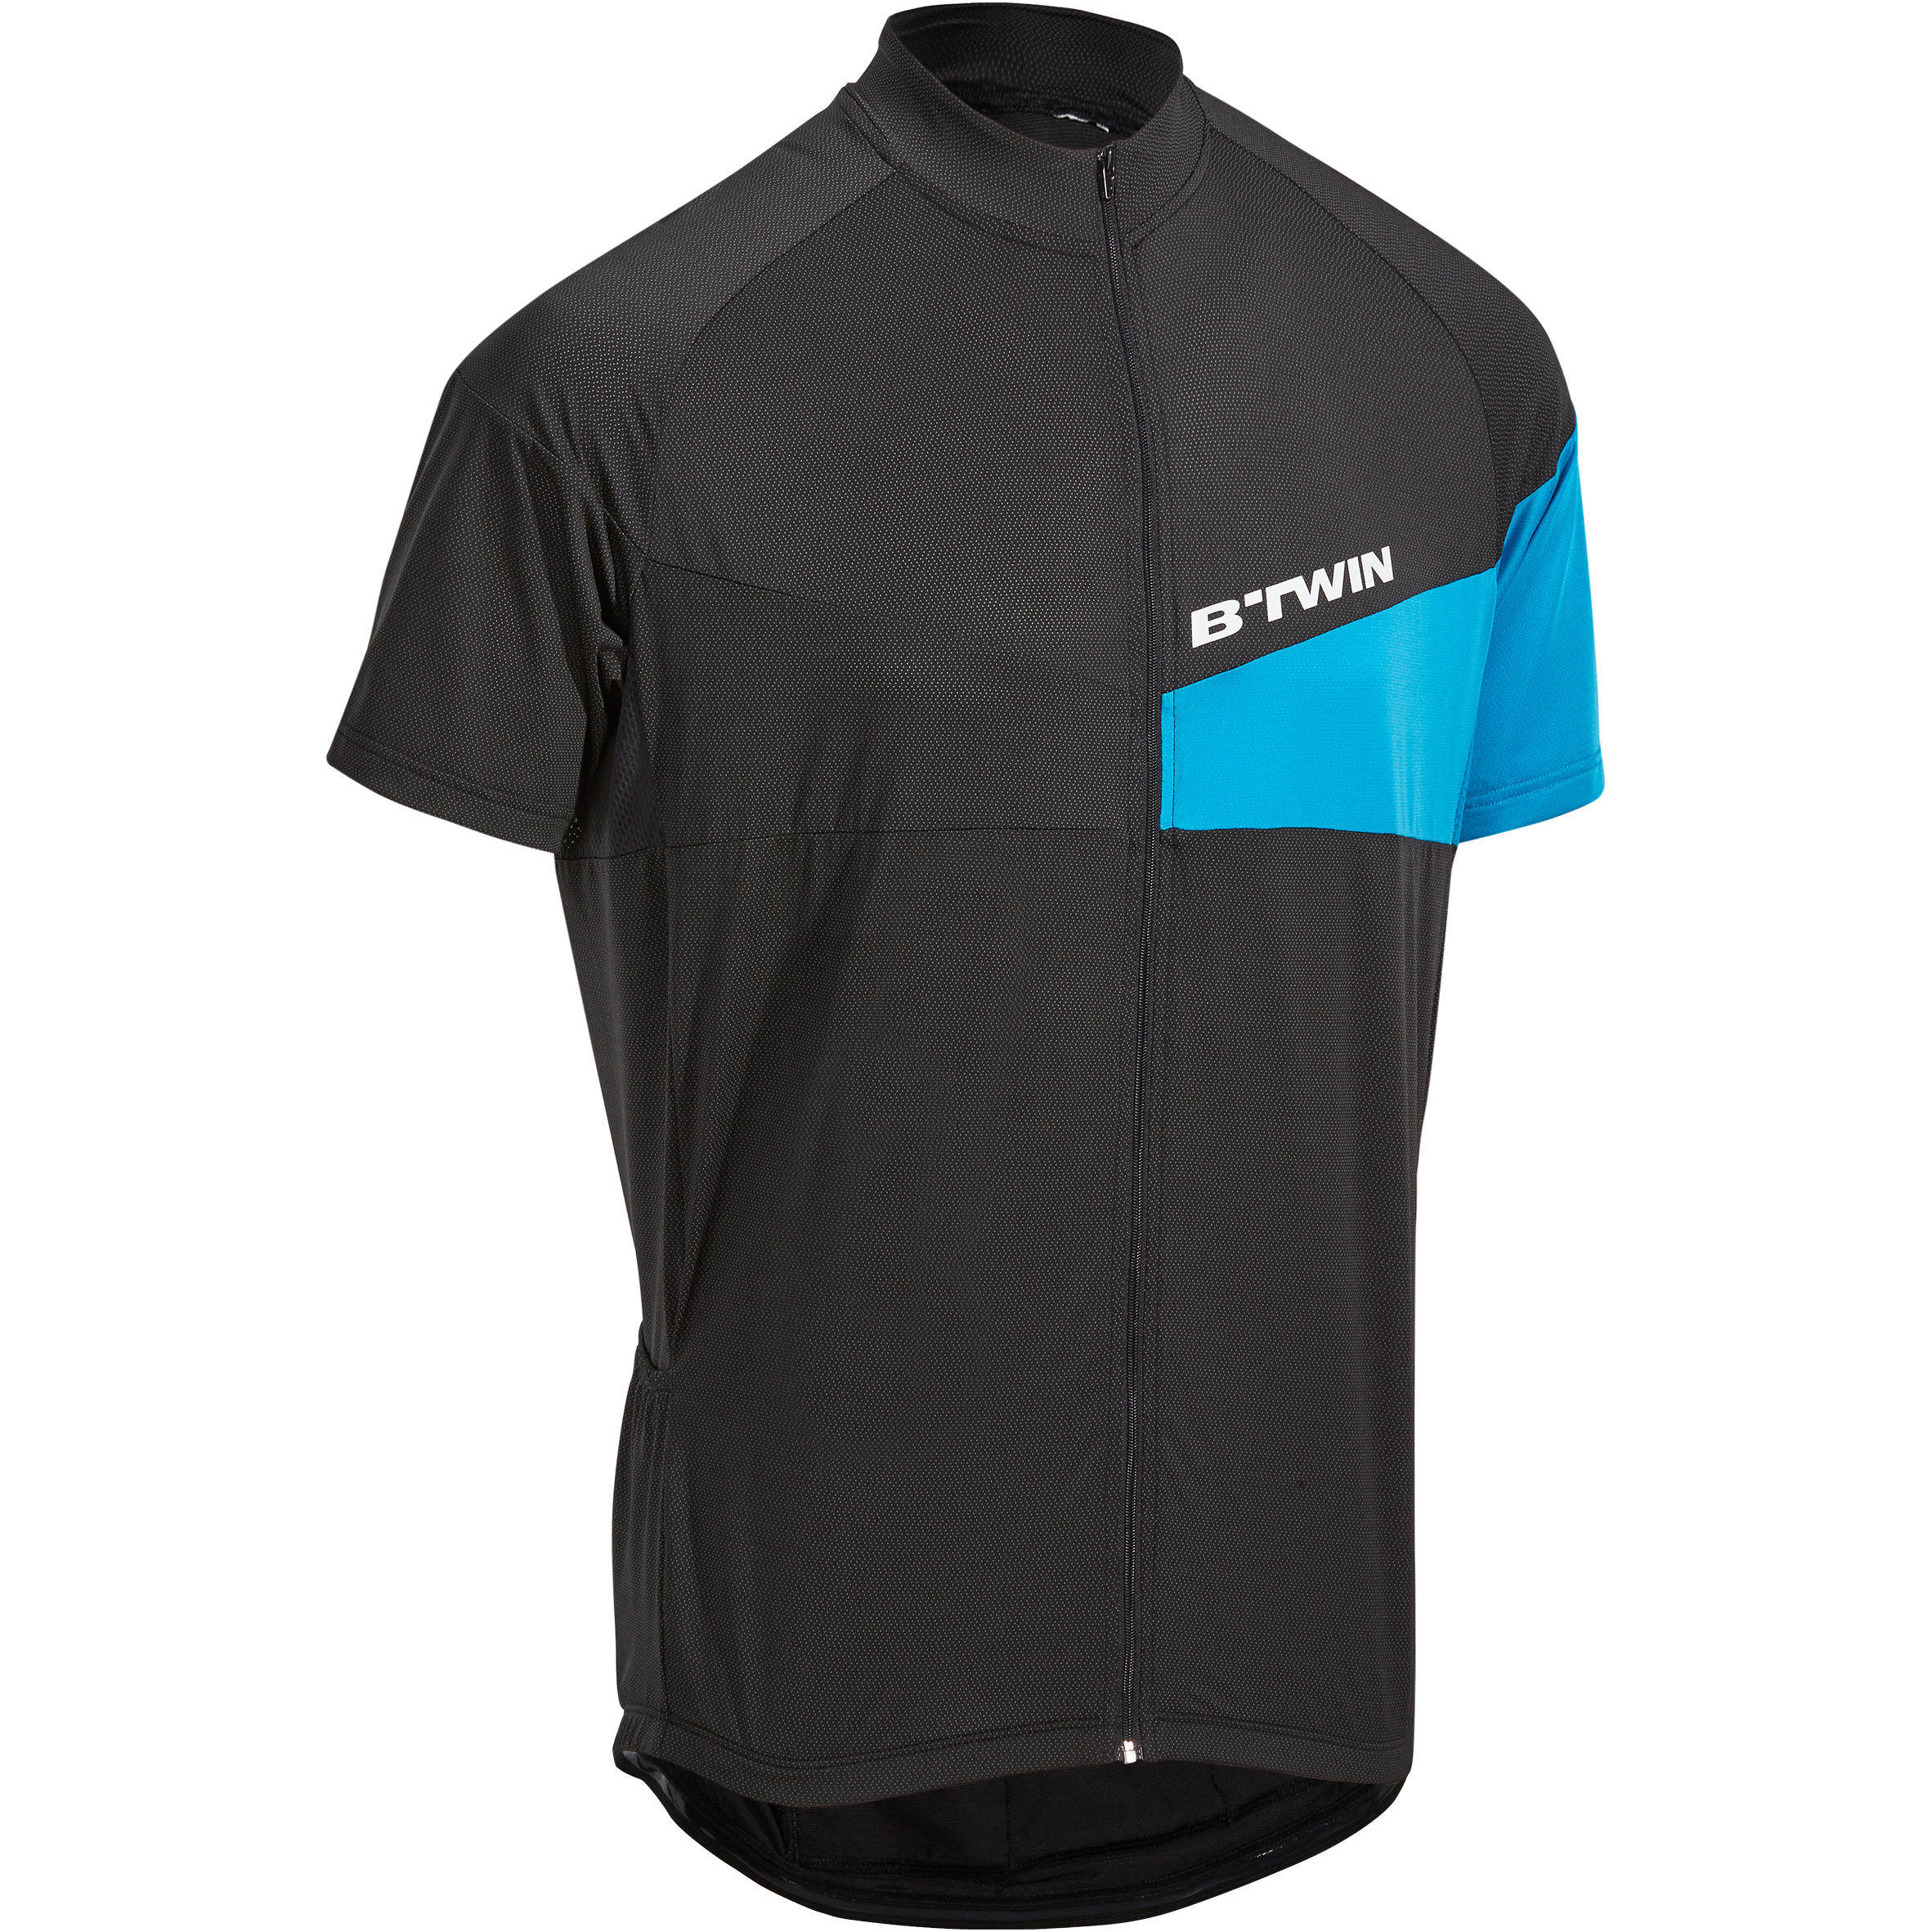 BTWIN 500 Short-Sleeved Cycling Jersey - Black/Blue